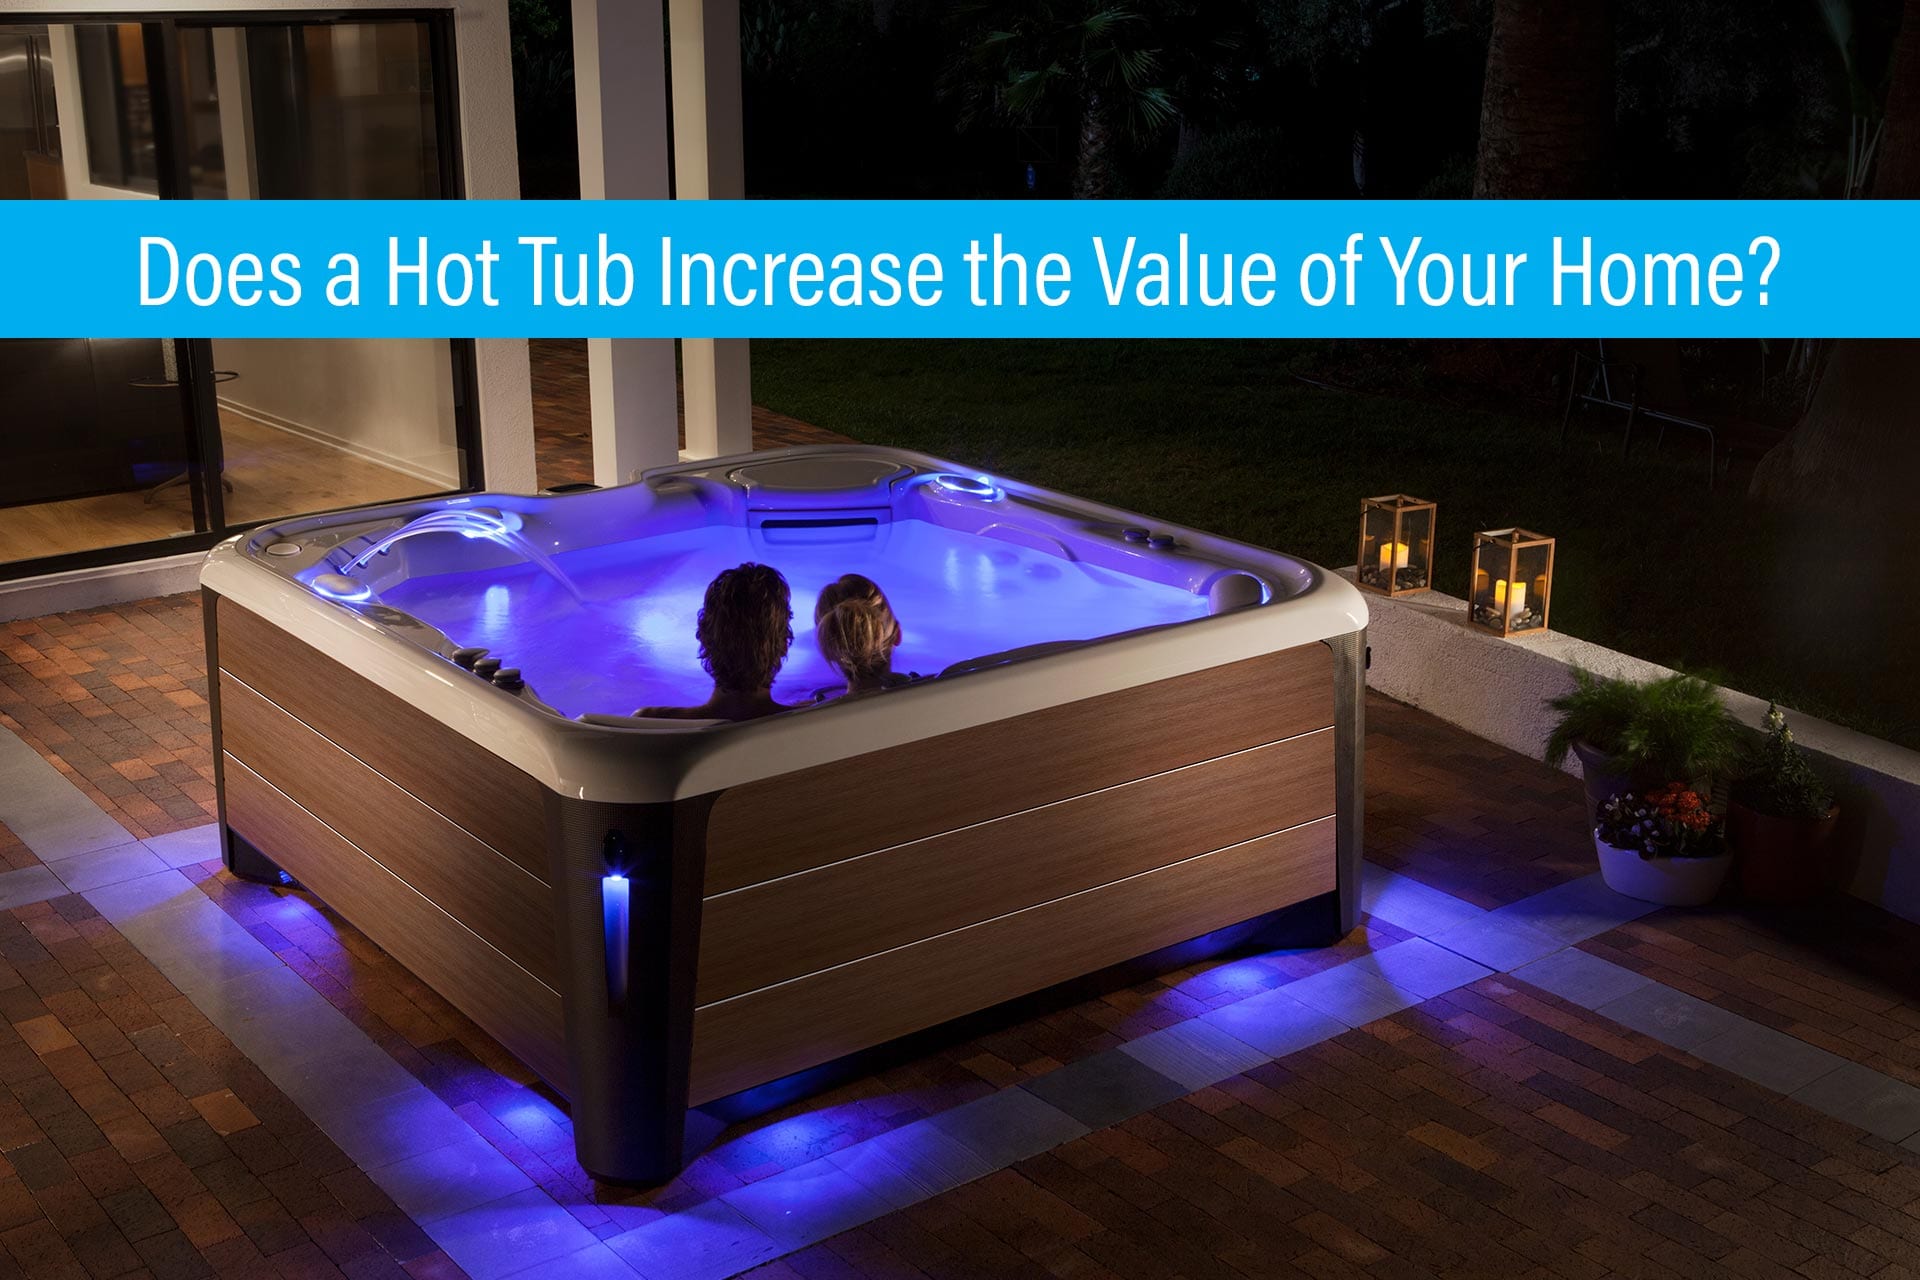 Does a Hot Tub Increase the Value of Your Home?